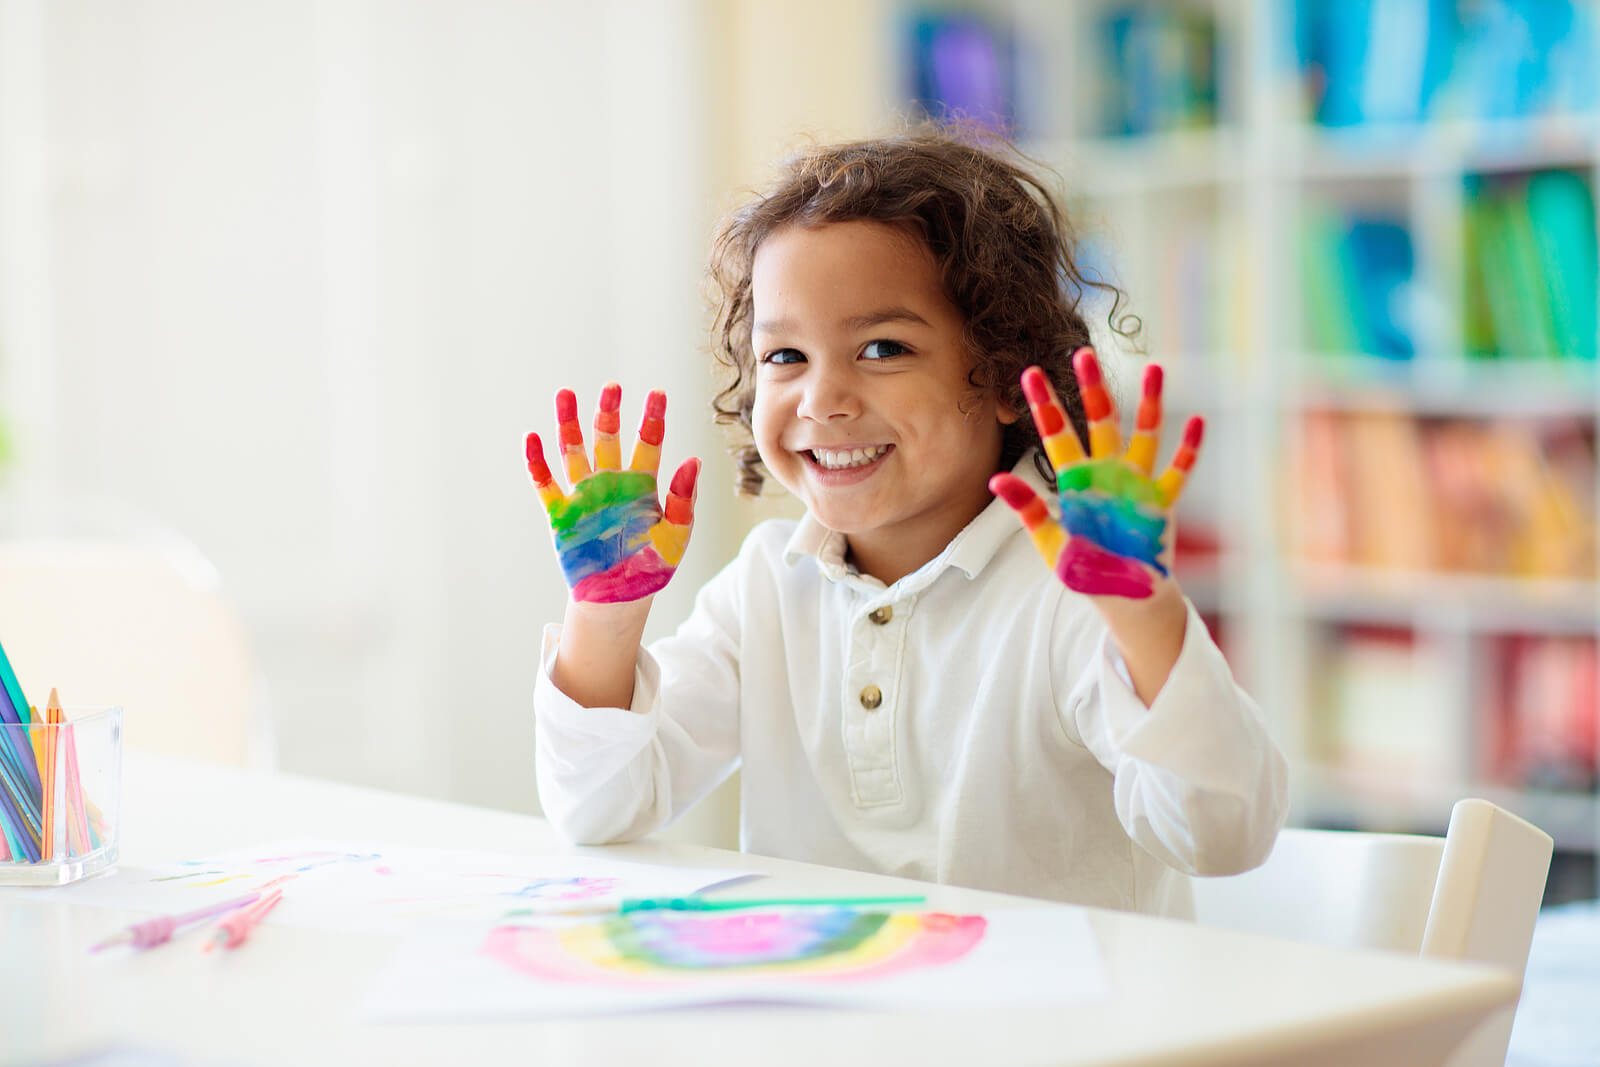 Image of a young child holding up their hands that are painted like the rainbow. If your child struggles with their behavior, find support with child neuropsych testing in Saint Petersburg, FL. A skilled neuropsychologist can help provide you and your child with support.